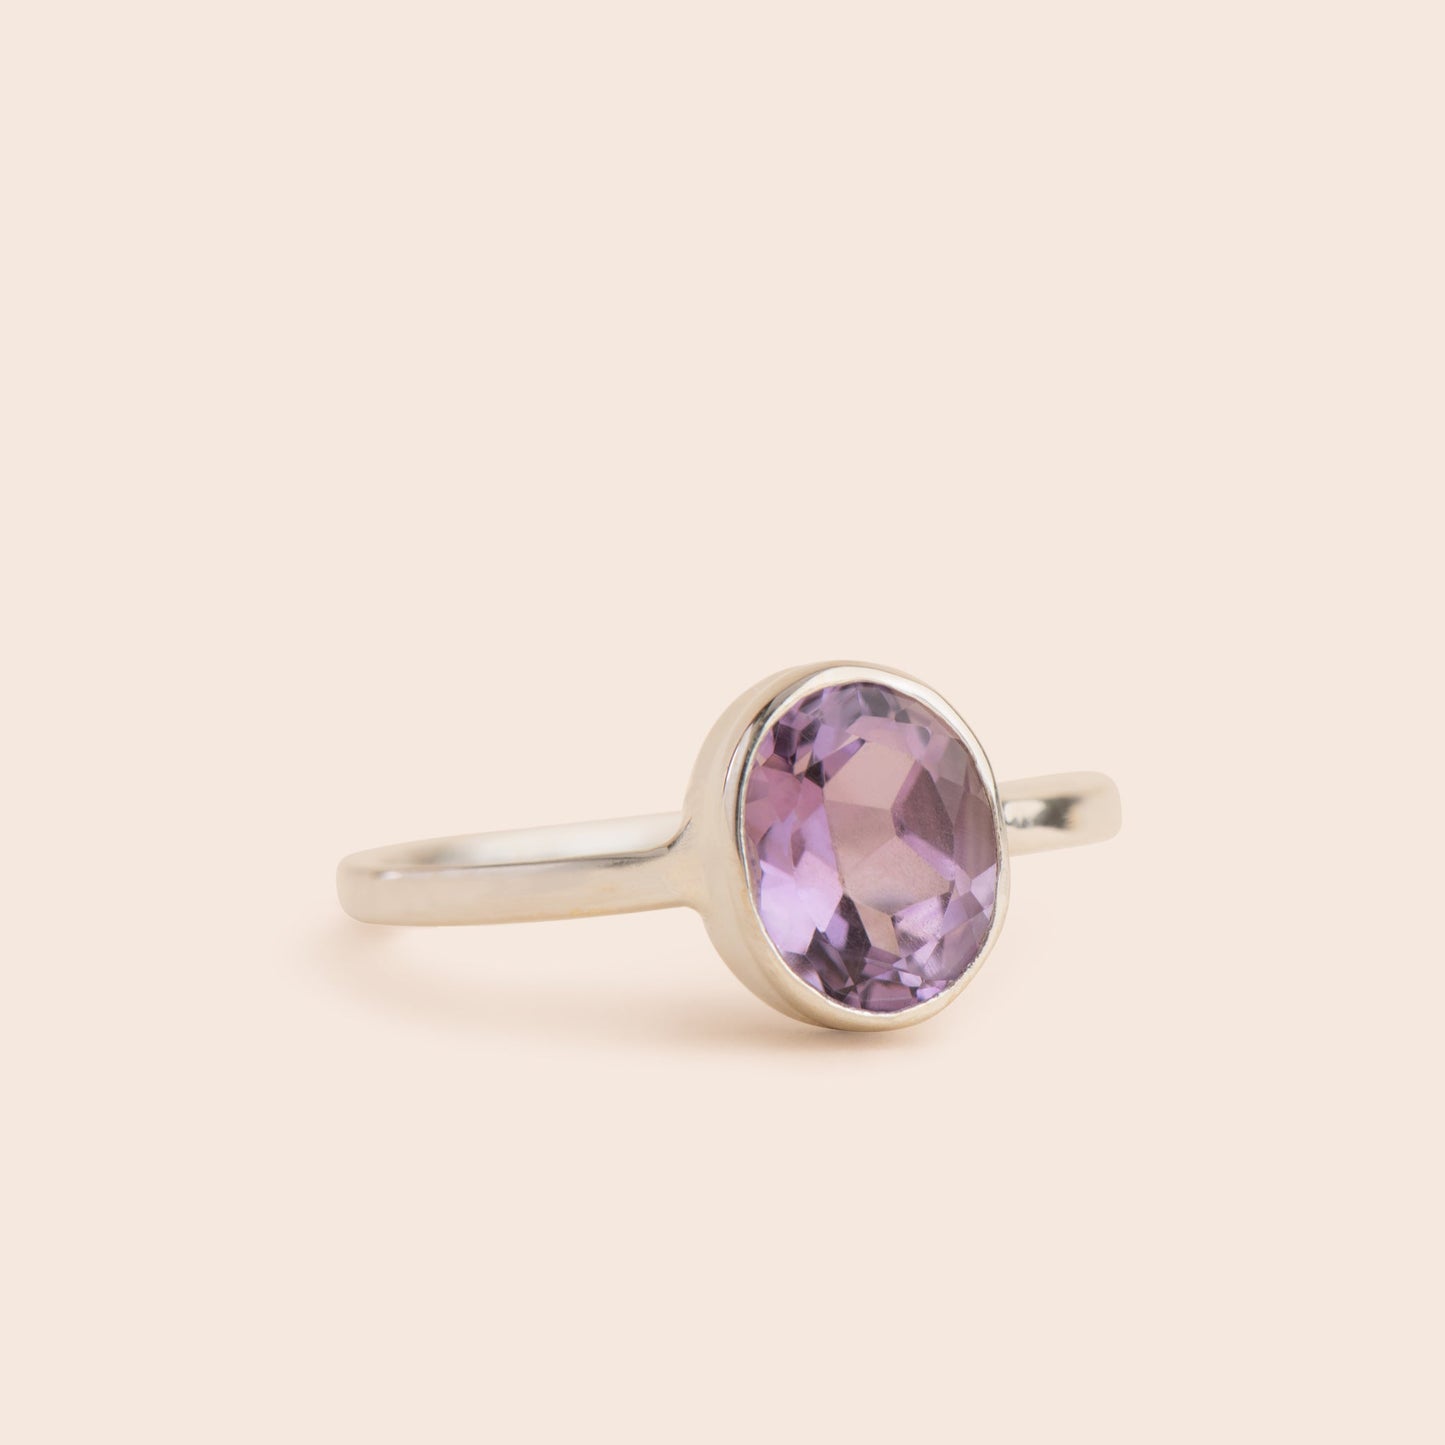 Luminous amethyst stone set in an oval shape on a gleaming sterling silver band, a timeless piece of jewelry to add to your collection.